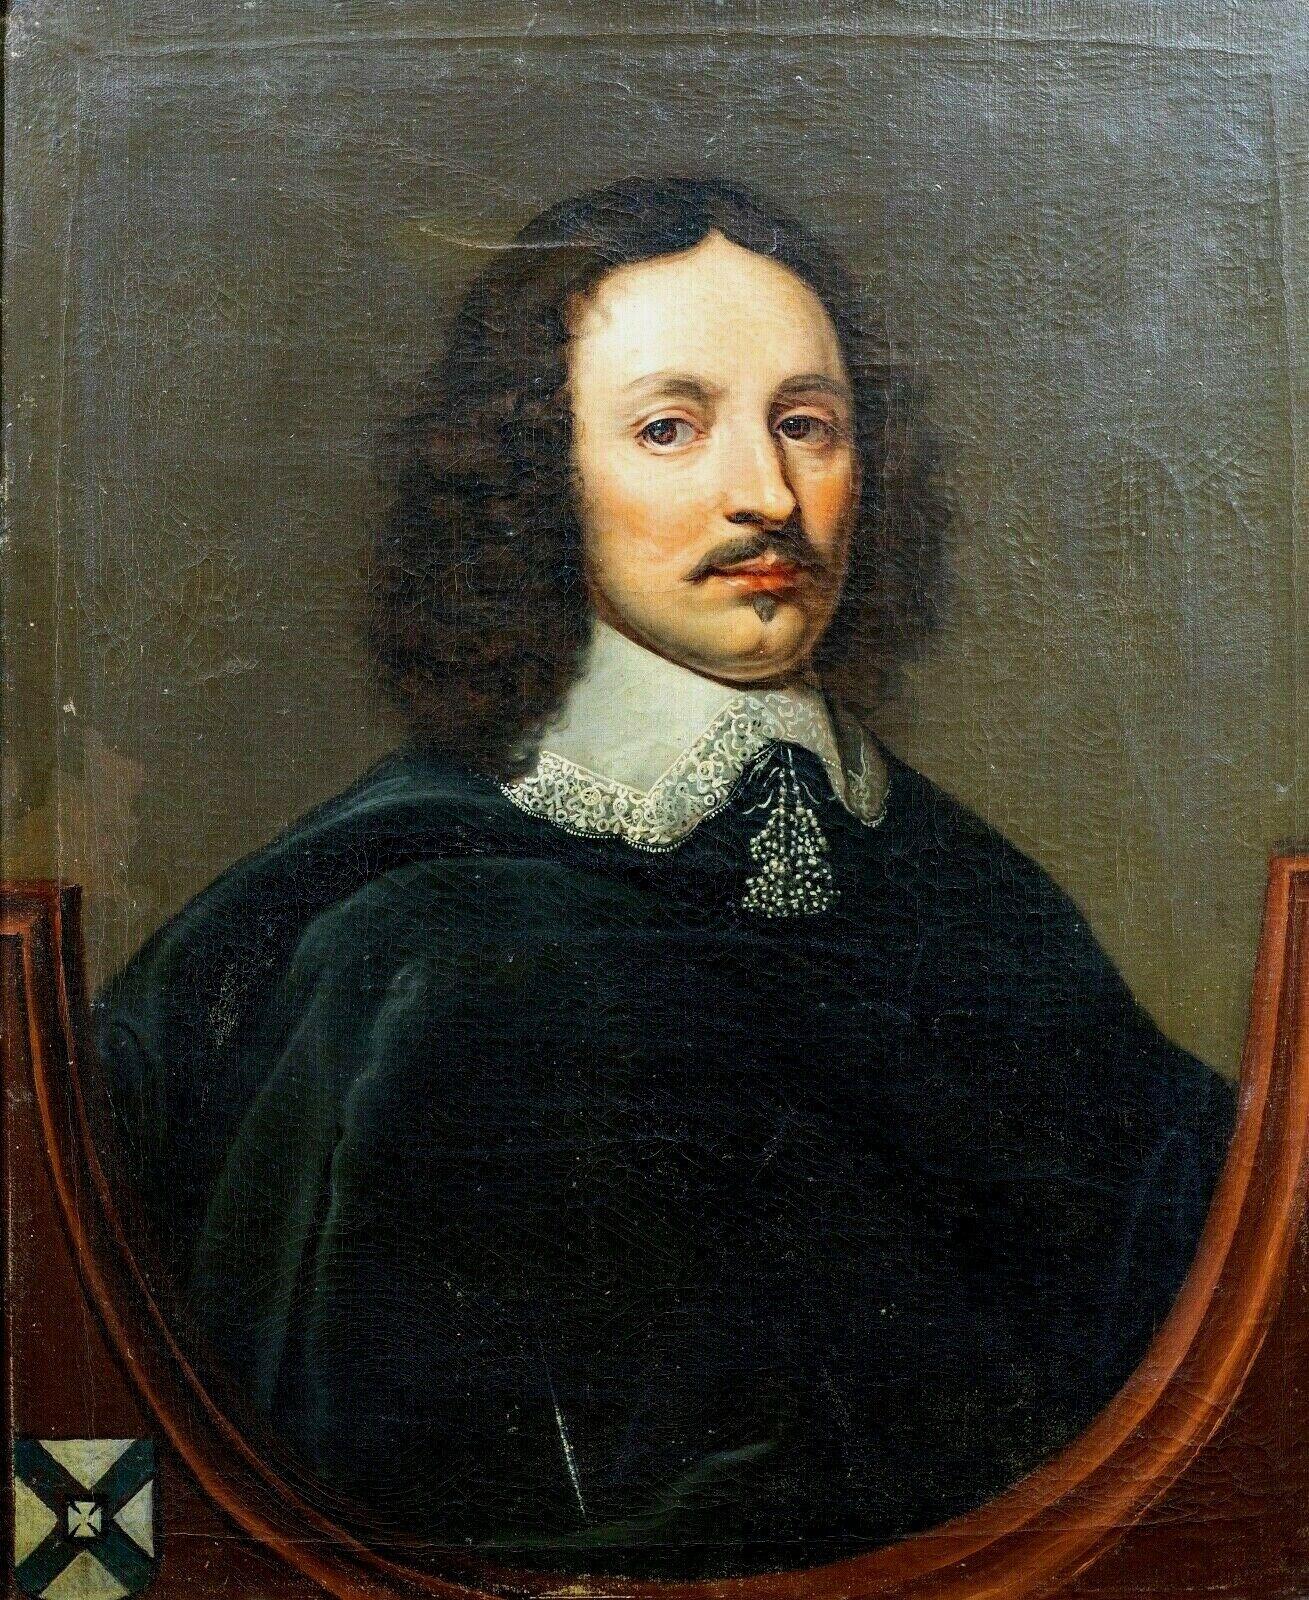 Portrait Of William Yorke (1609-1666), 17th Century - Painting by Edward Bower